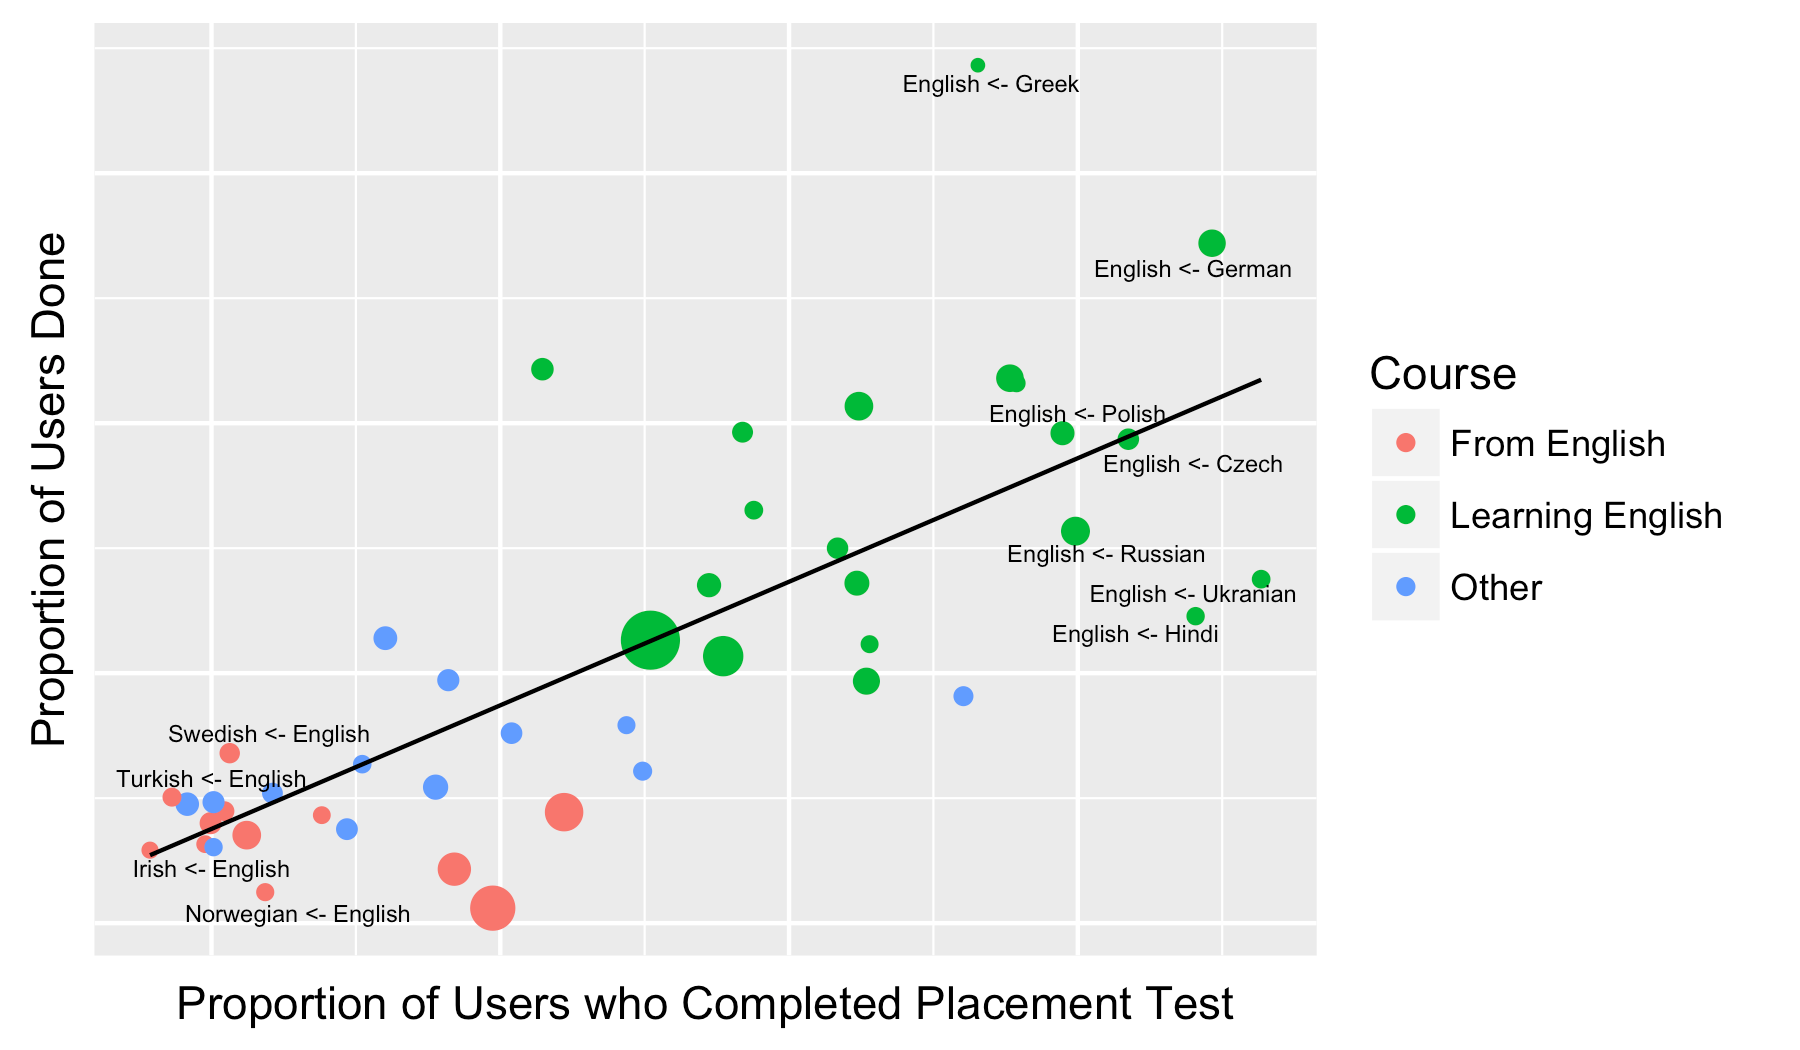 Proportion of users who finished the course versus the proportion of users who completed the placement test